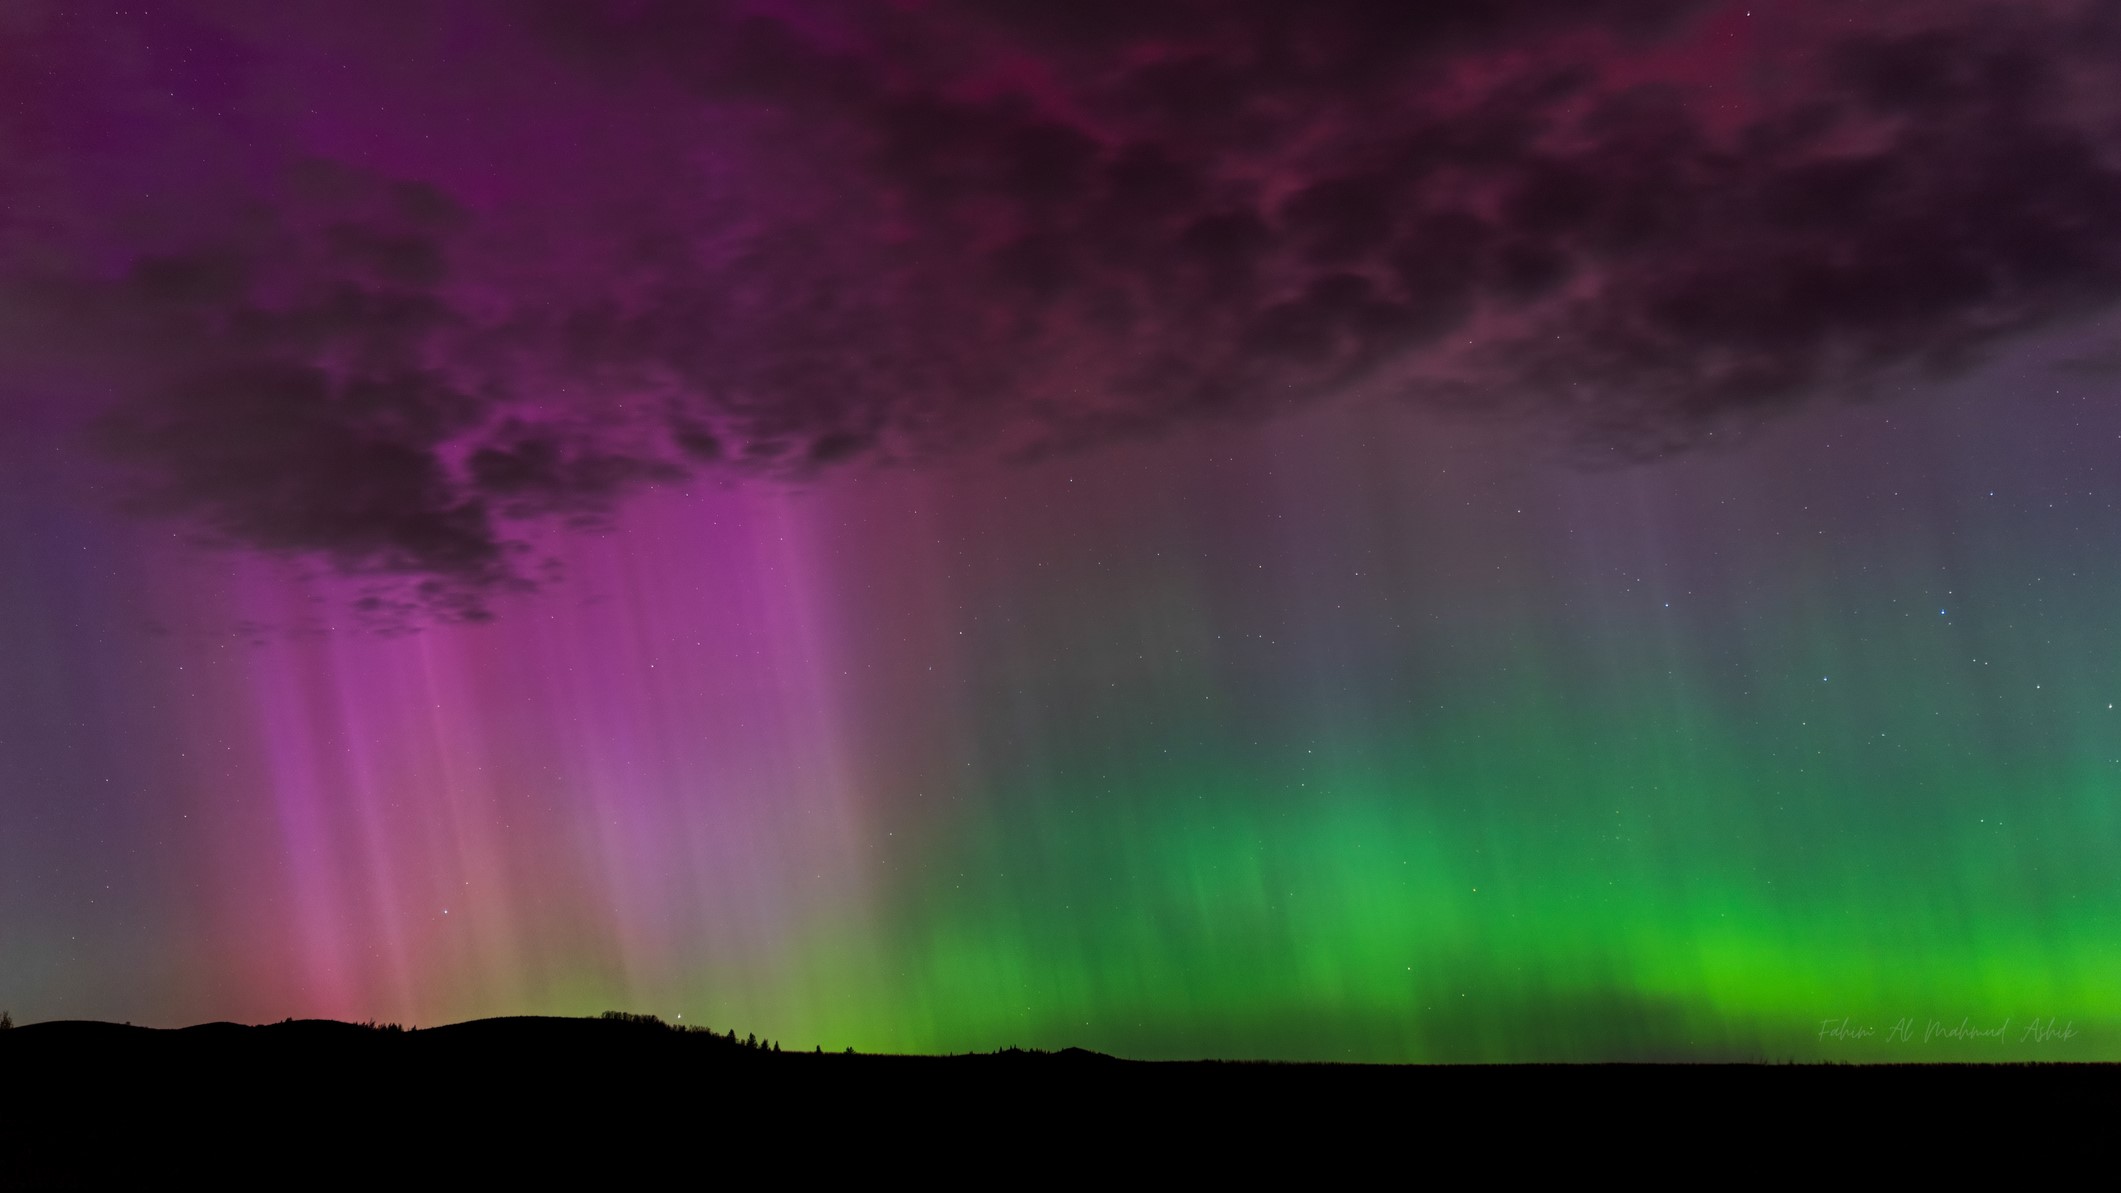  Aurora alert: Possible geomagnetic storm could bring northern lights as far south as New York 